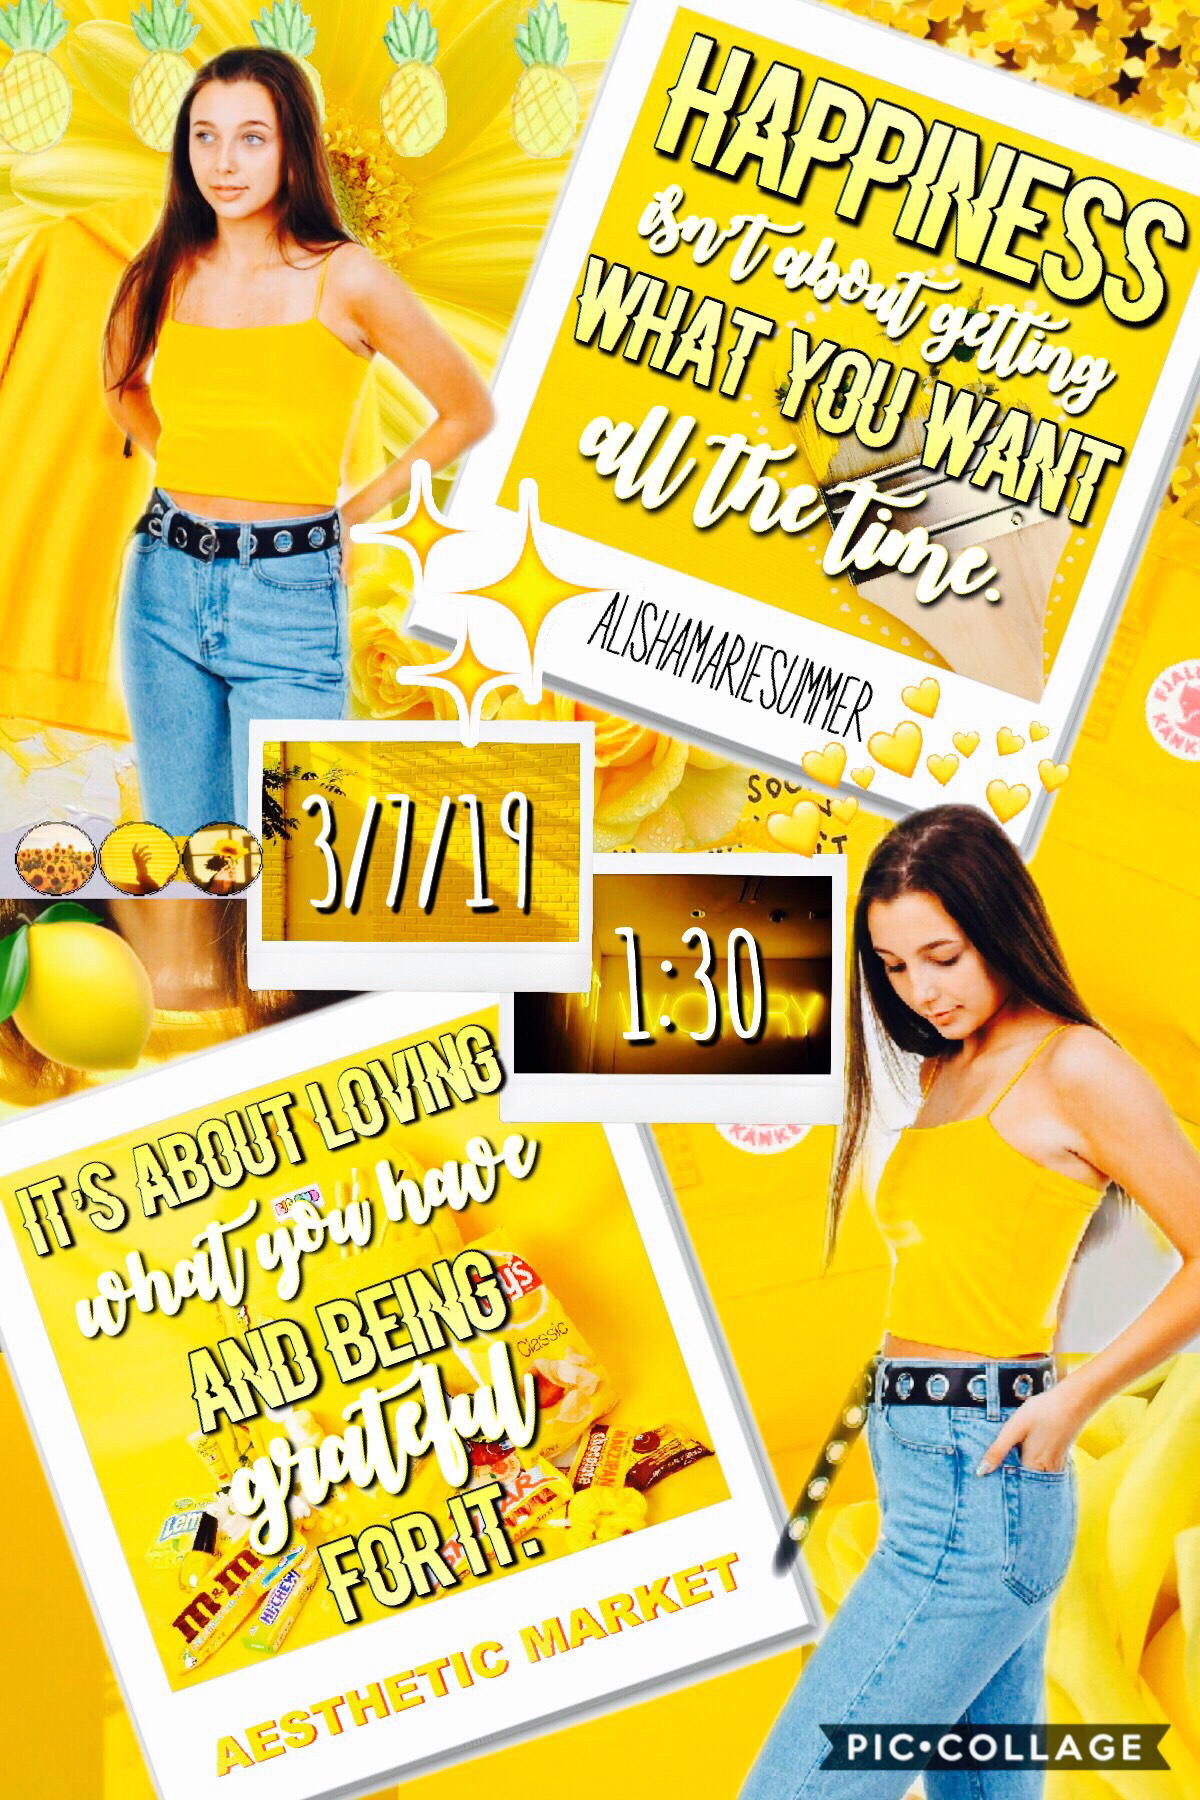 💛TaP💛
hey guys, so sorry for all the yellow edits. Y’all are probably like “STOP POSTING YELLOW EDITS MY EYES HURTTT” 😂😂 anyways i’ll be coming out with some Coachella edits soon!! QOTD in the comments⬇️